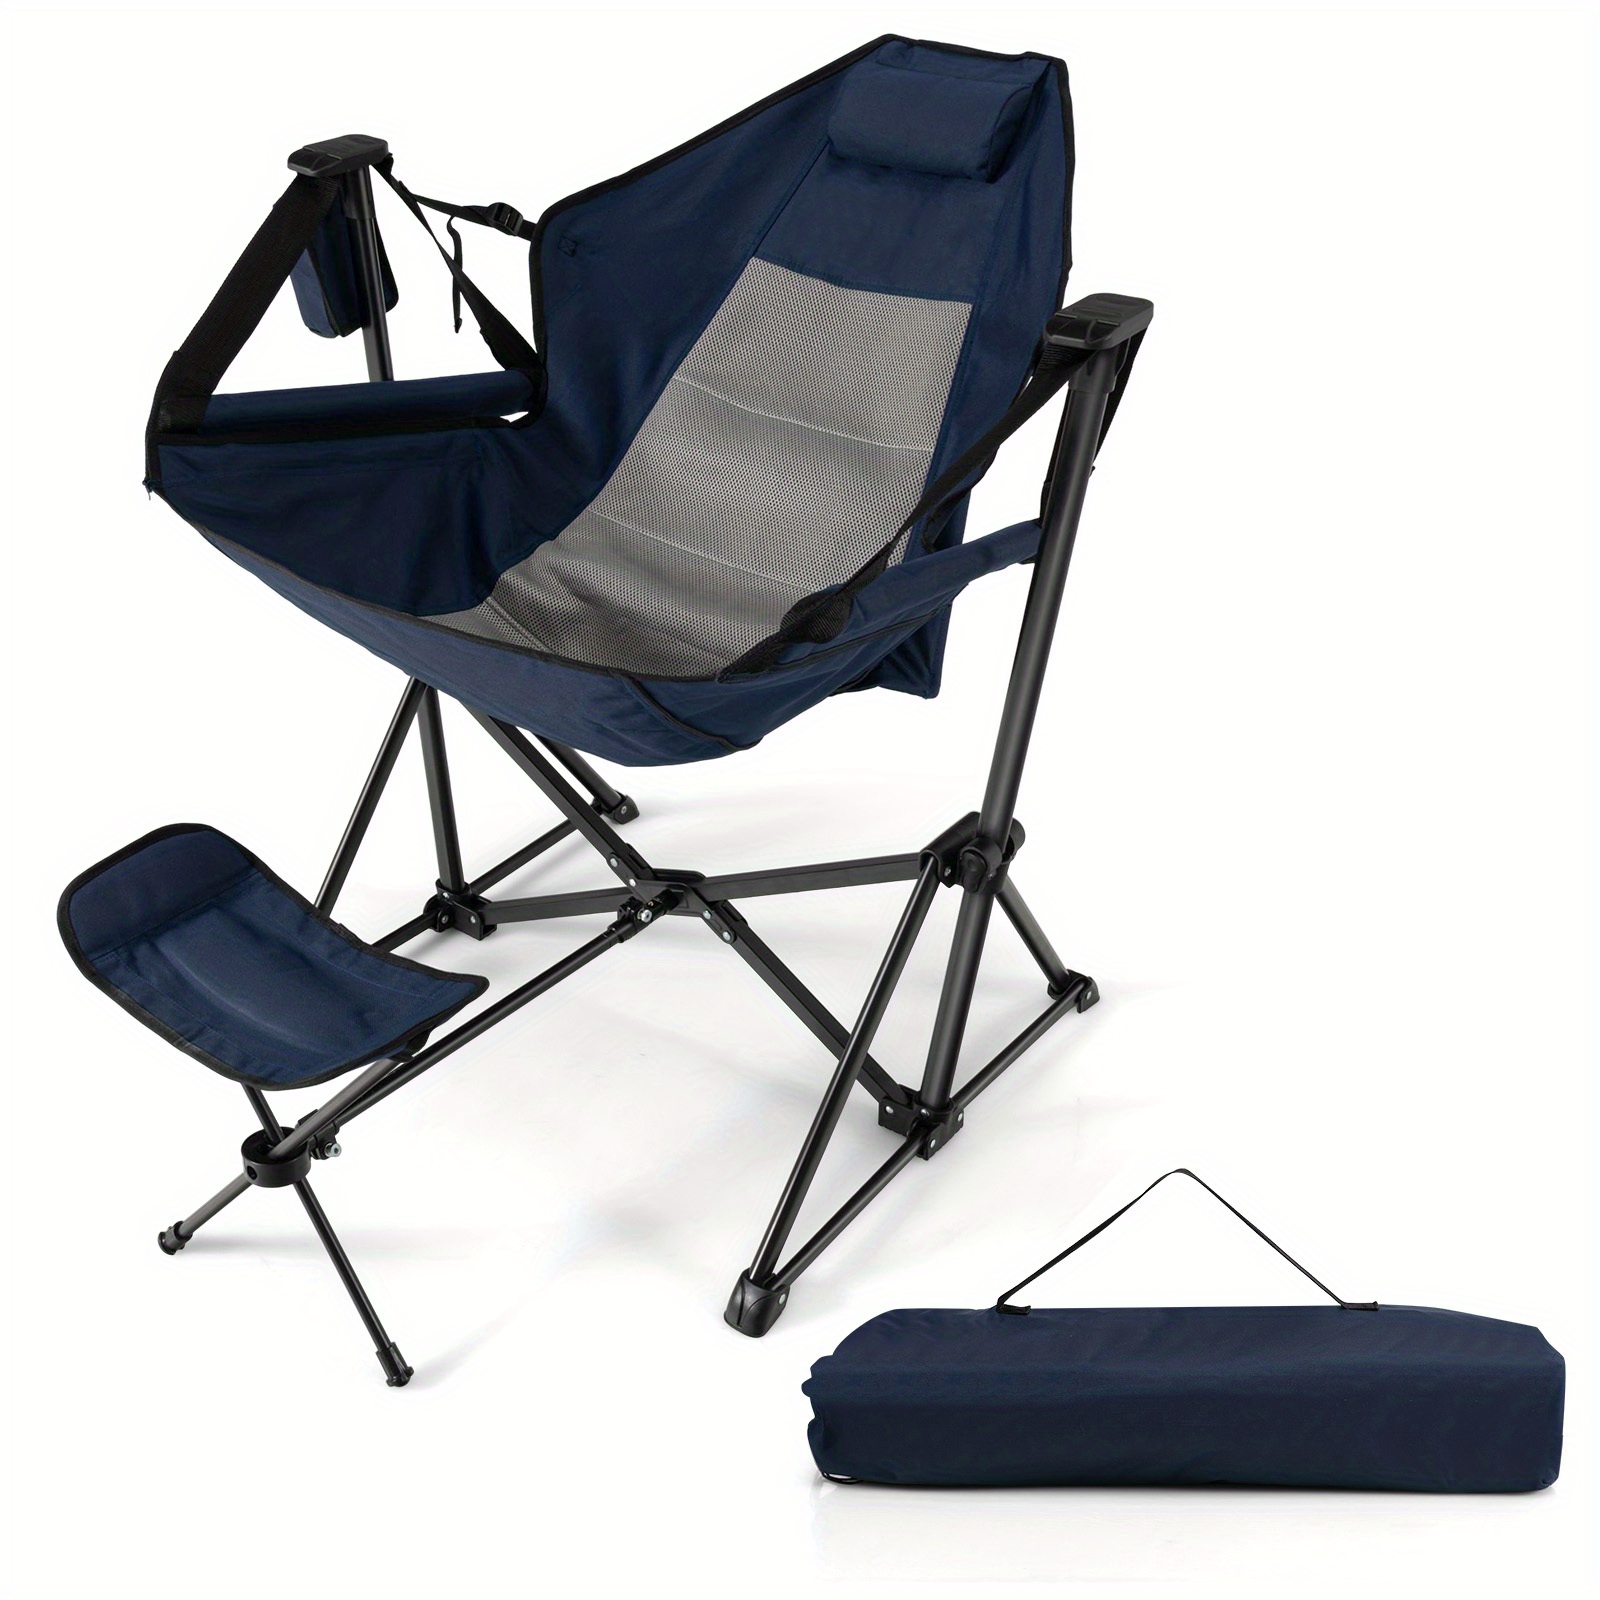 

Lifezeal Hammock Camping Chair W/ Retractable Footrest & Carrying Bag For Camping Picnic